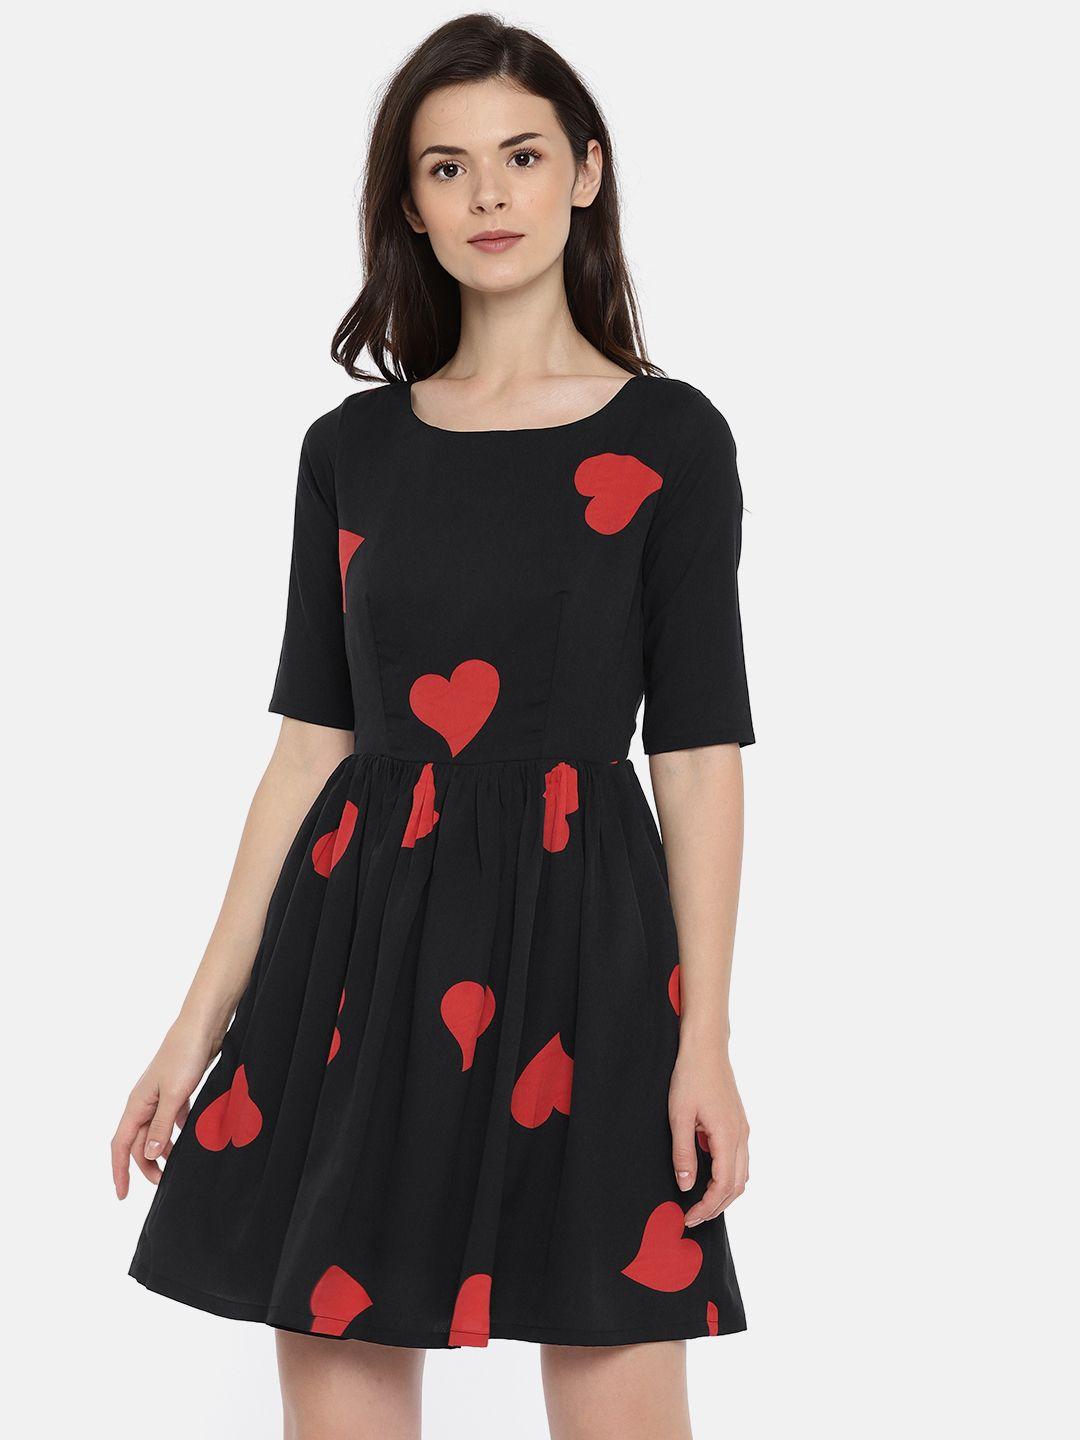 roving mode women black & red heart print fit and flare dress